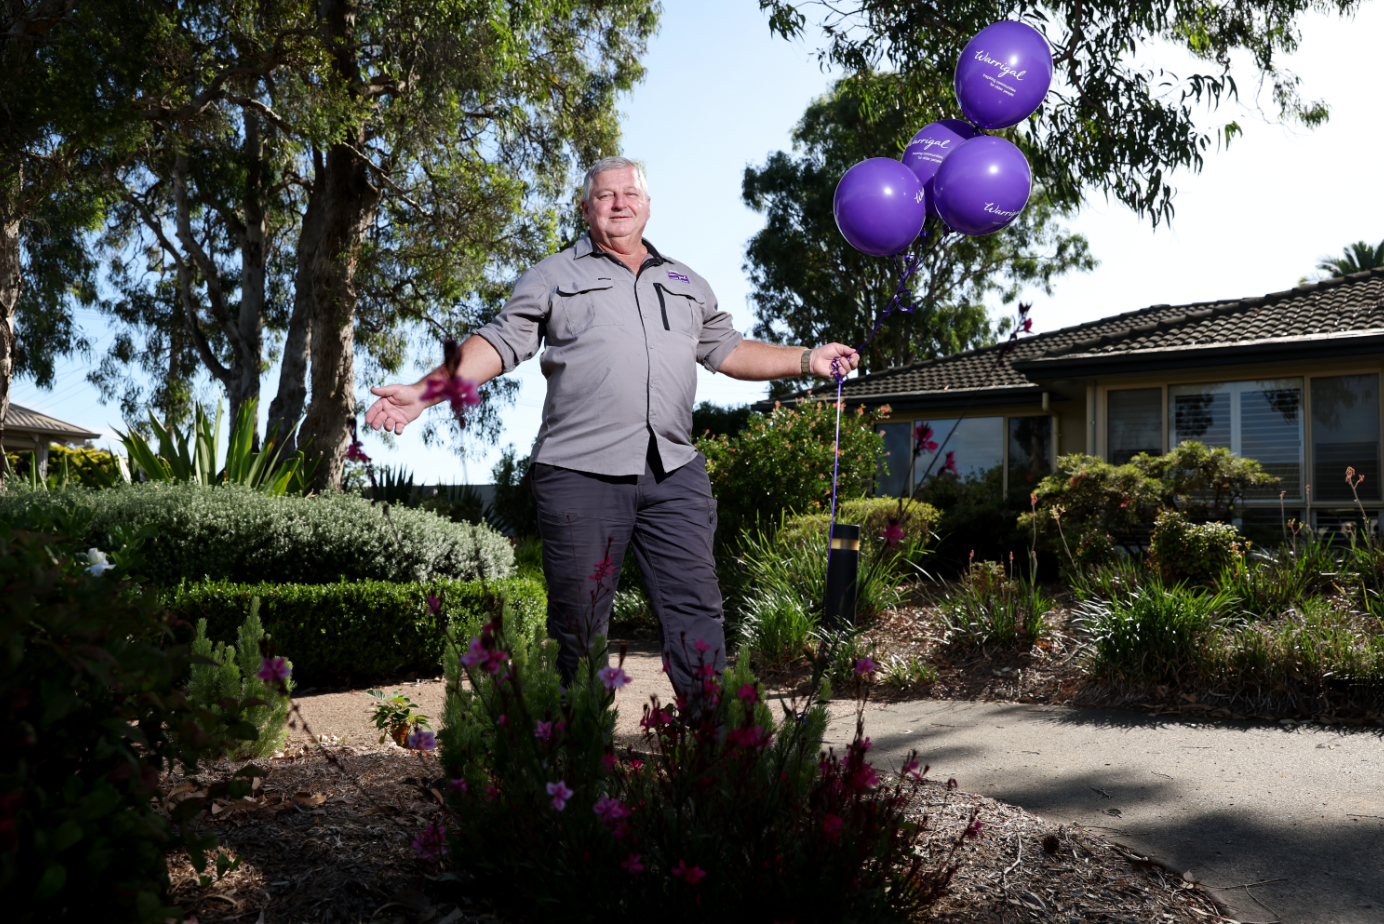 Warrigal staff member smiles at camera holding purple balloons with logo